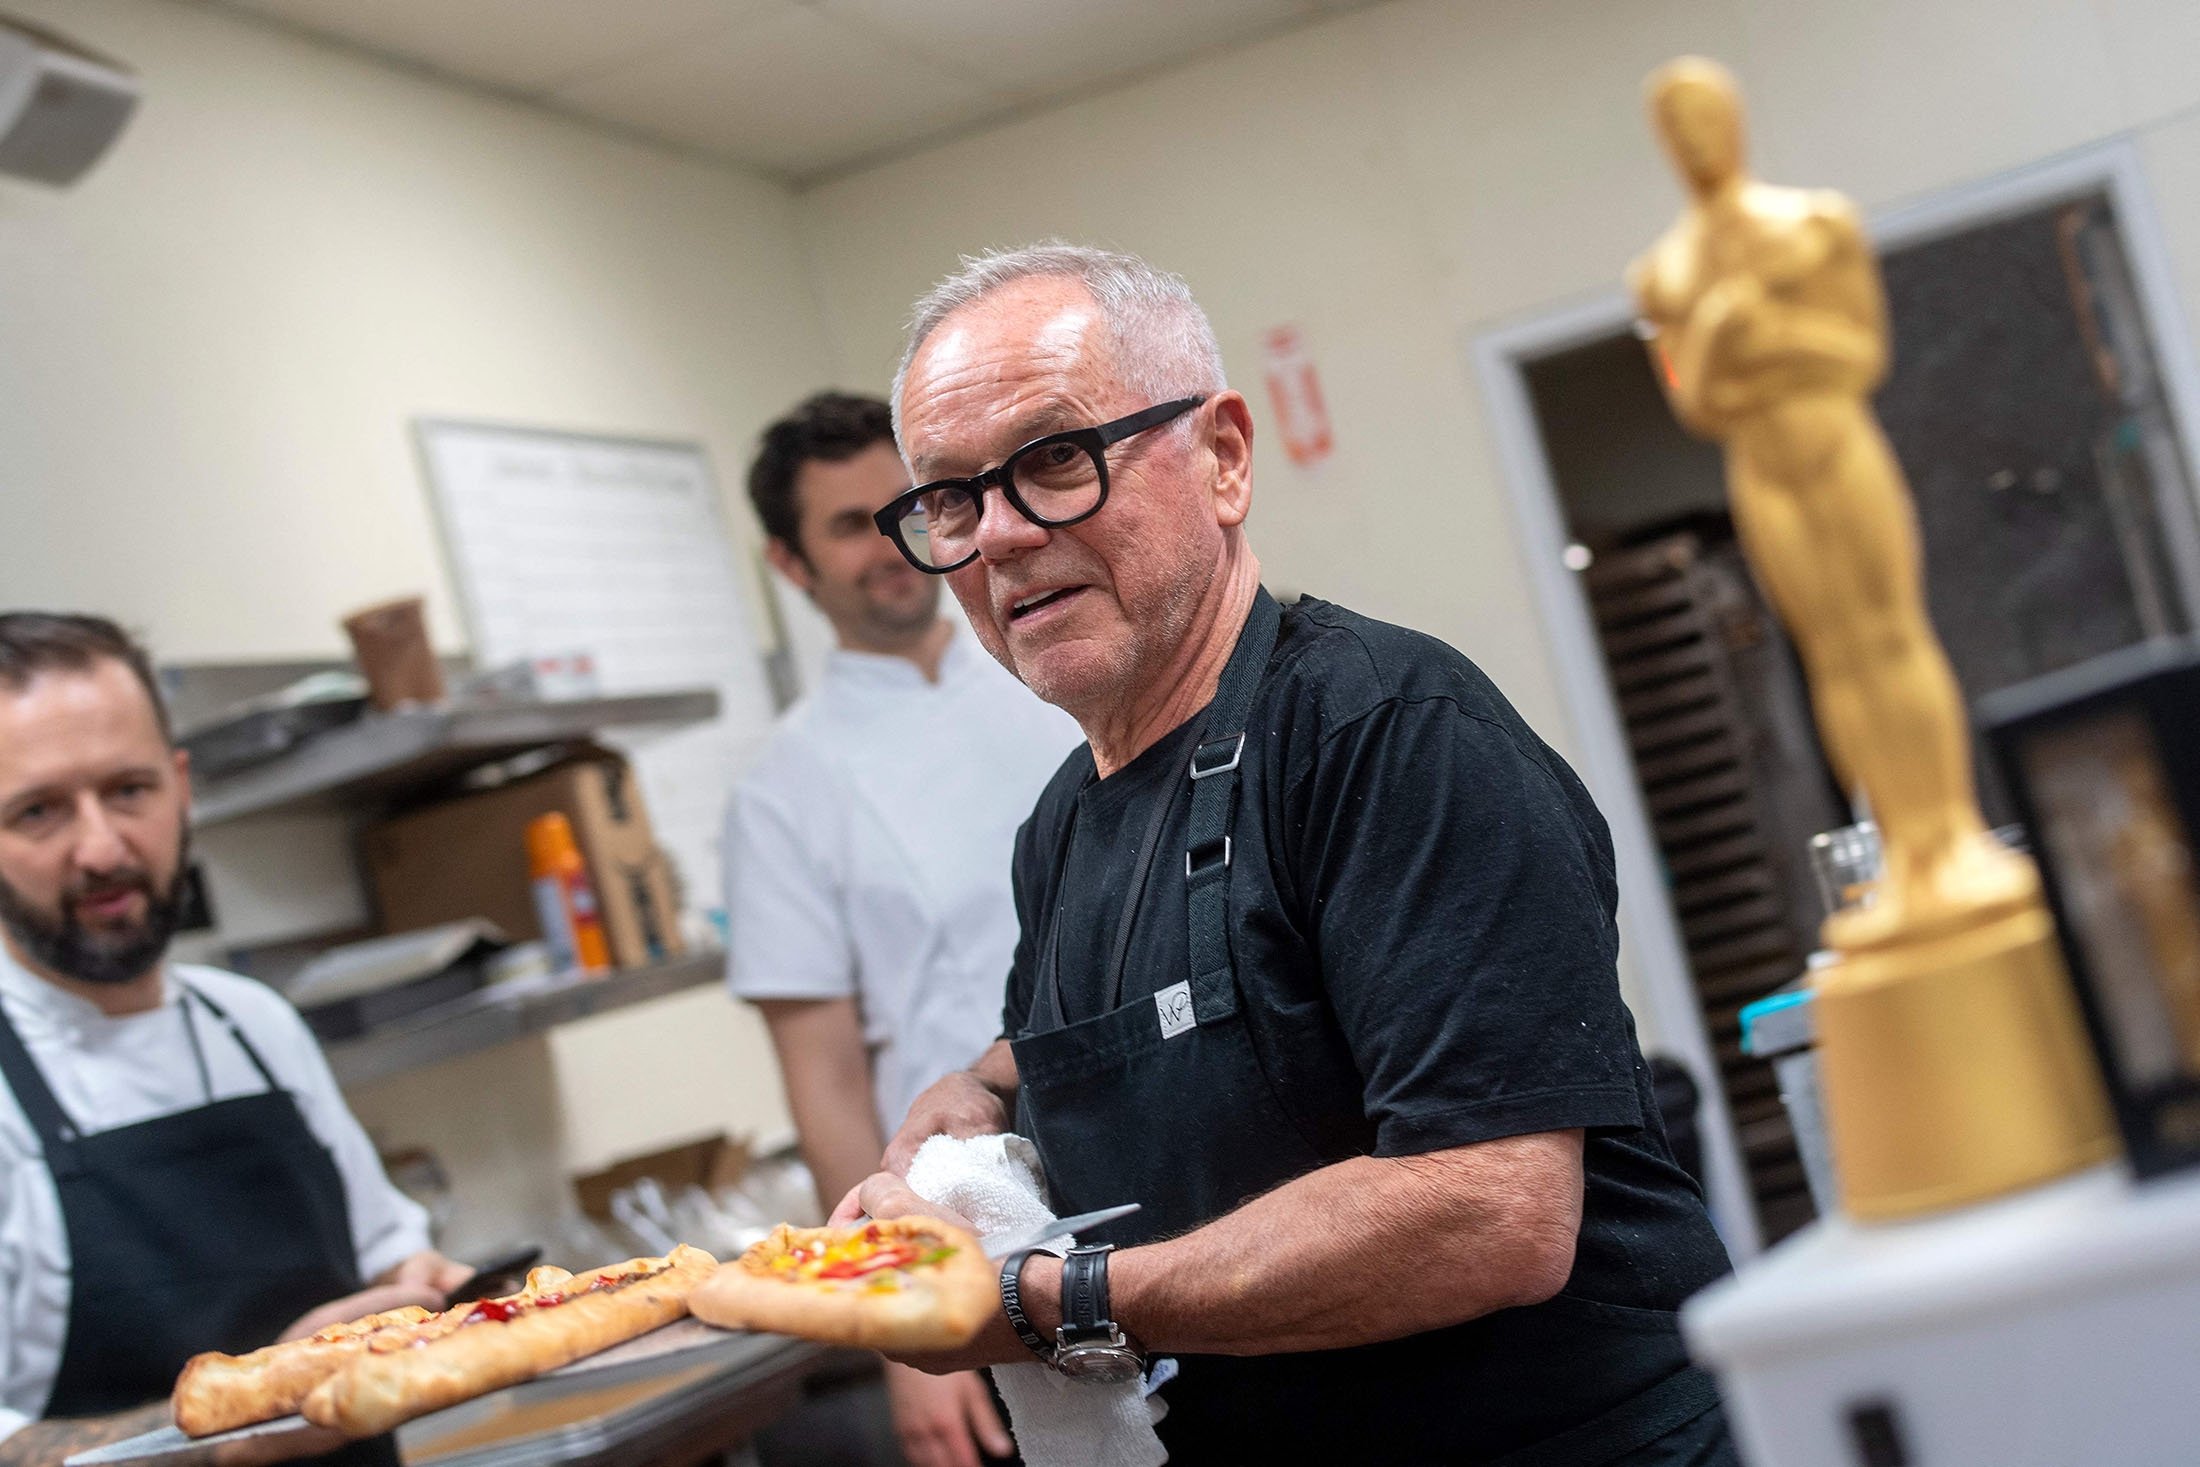 Chef Wolfgang Puck poses with pide fresh out of the oven at the 94th Annual Academy Awards Governors Ball Press Preview held at the Hollywood And Highland Center, in Hollywood, California, U.S., March 24, 2022. (AFP Photo)